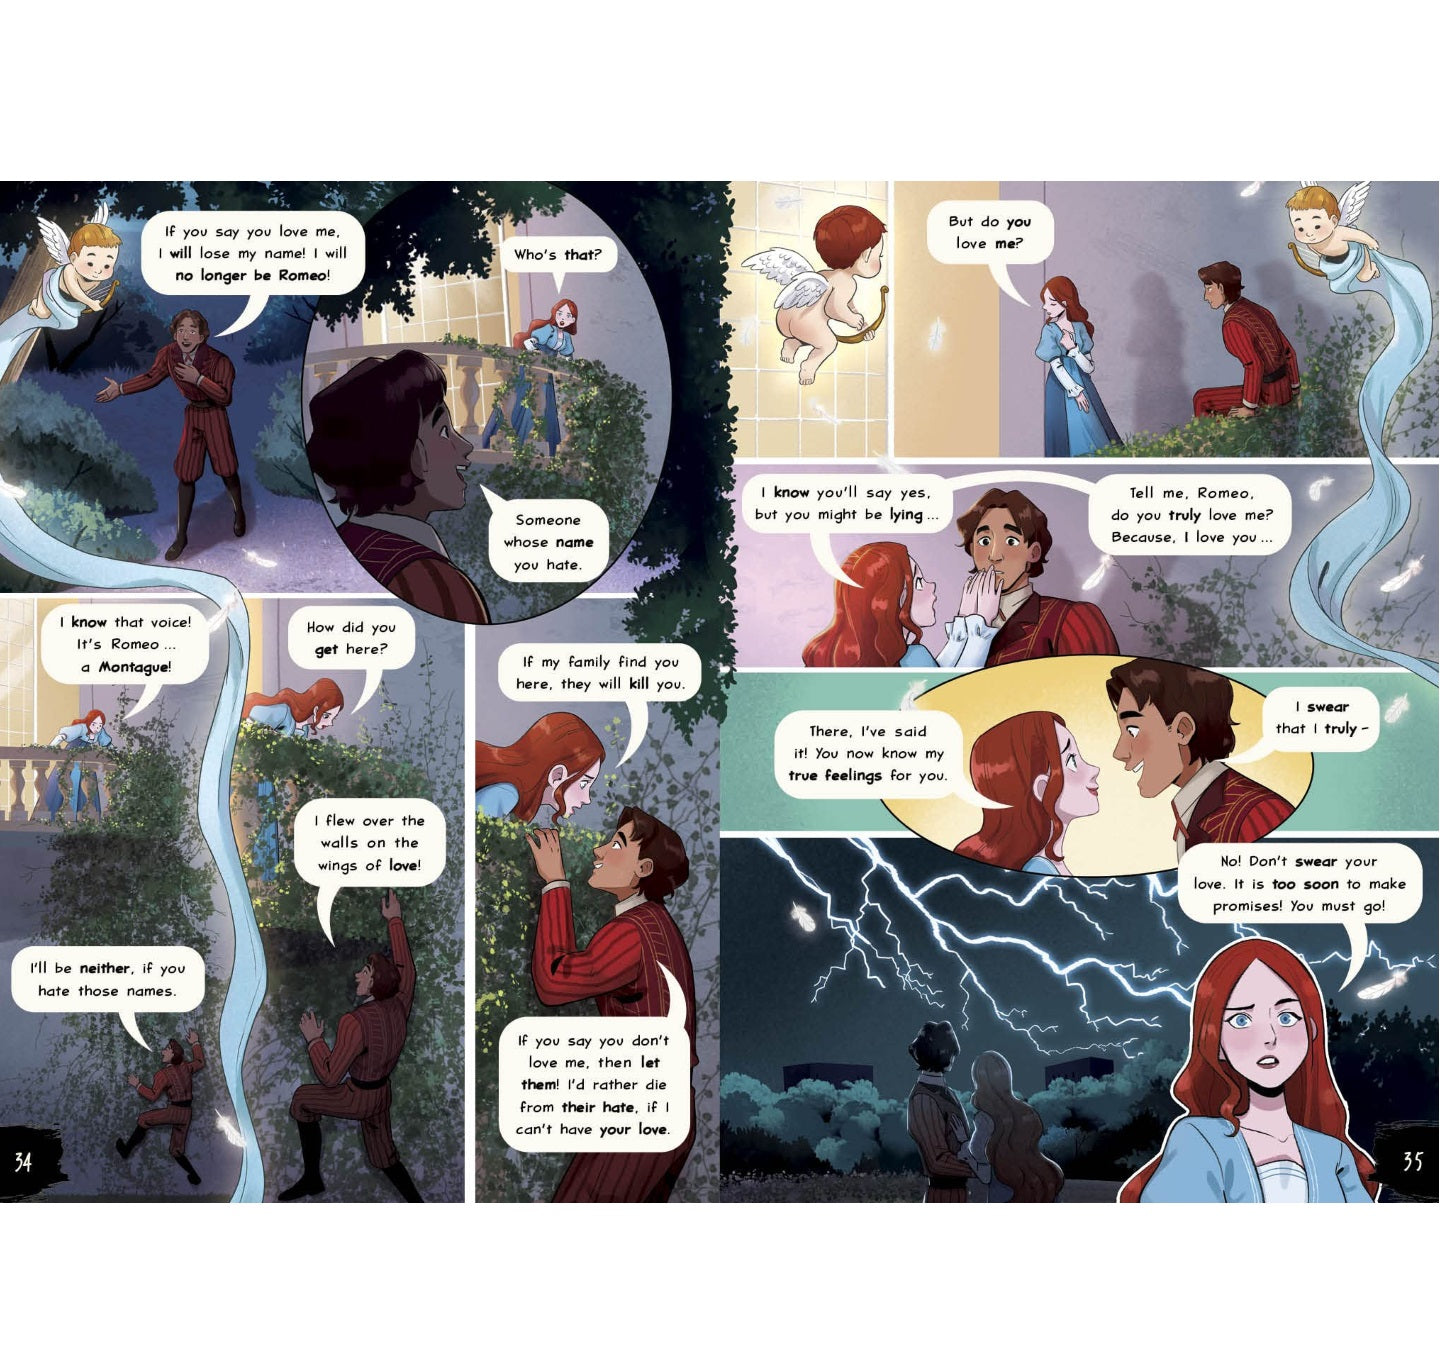 Shakespeare's Romeo and Juliet: A Graphic Novel